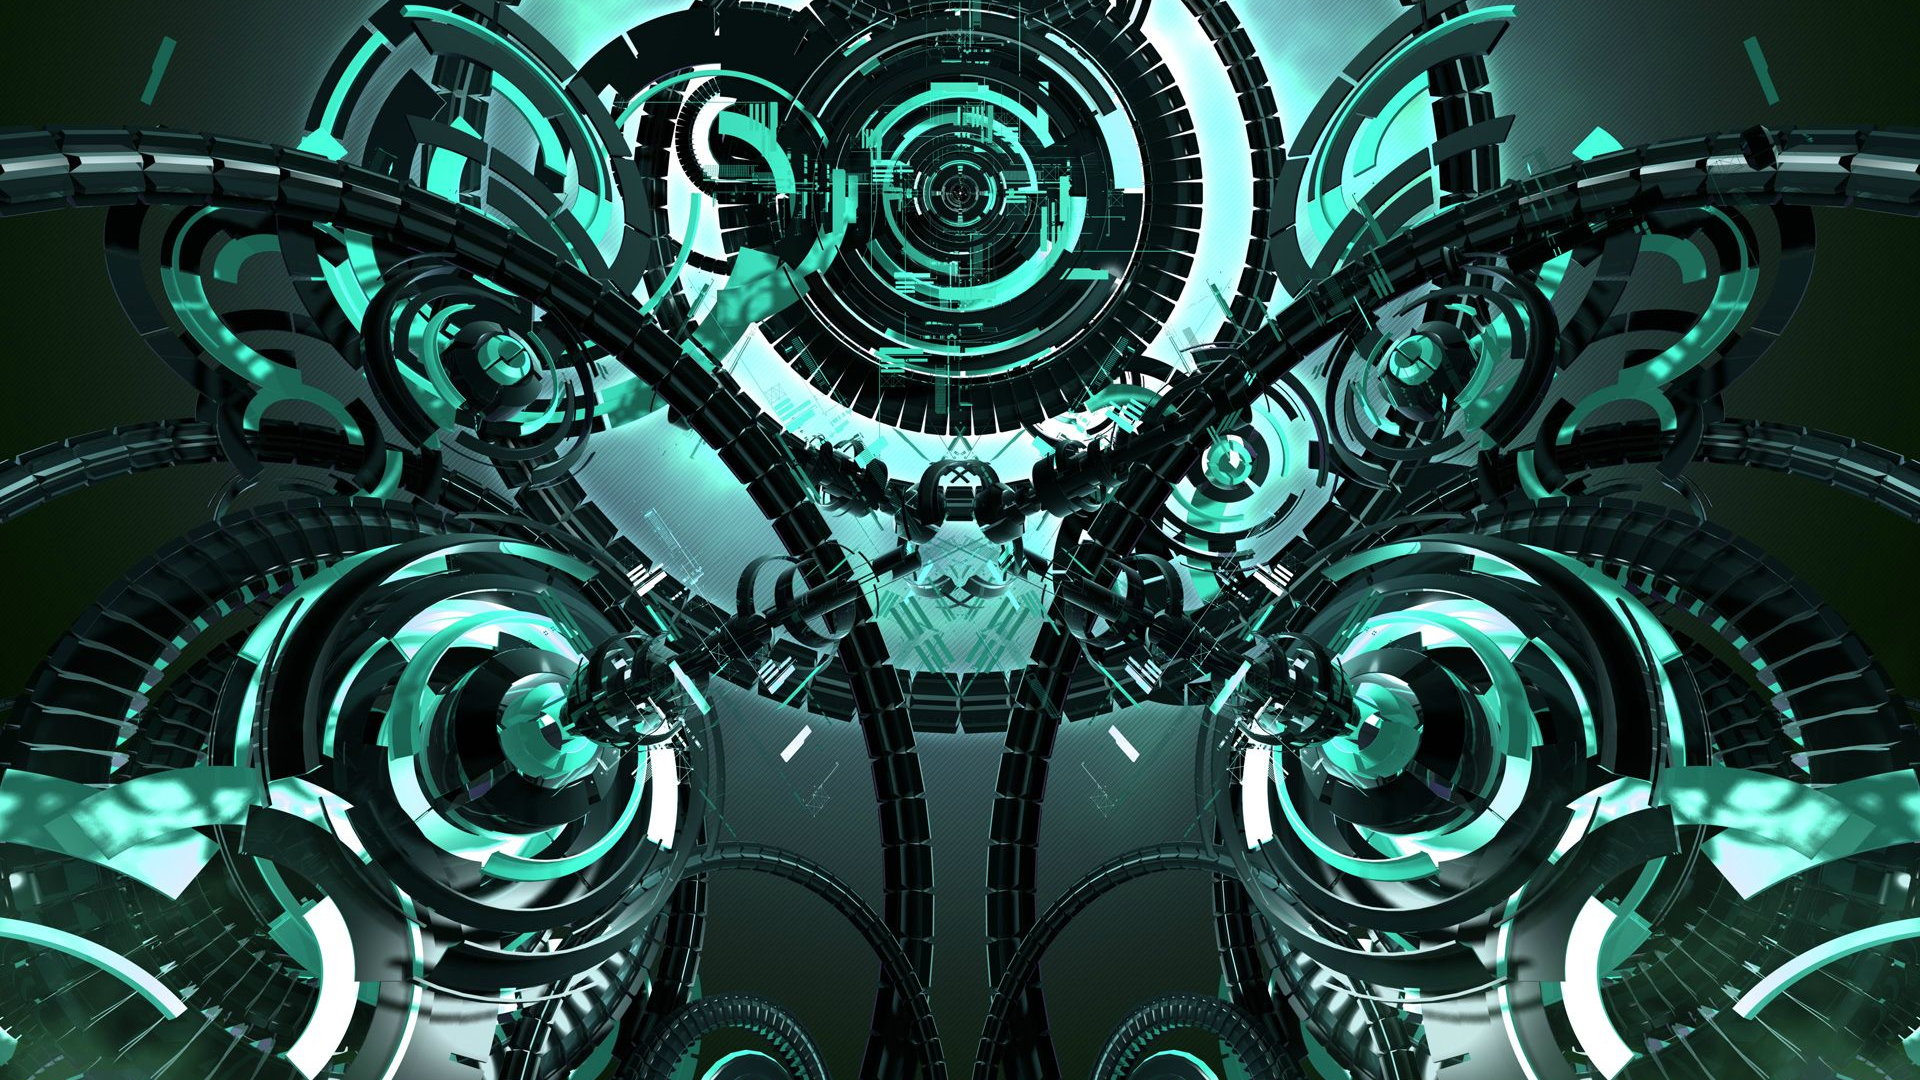 1920x1080 Free download 1920x1200px Awesome Music Wallpaper [1920x1200] for your Desktop, Mobile \u0026 Tablet | Explore 29+ Awesome Music Abstract Wallpapers | Awesome Music Abstract Wallpapers, Abstract Music Wallpapers, Music Abstract Backgrounds